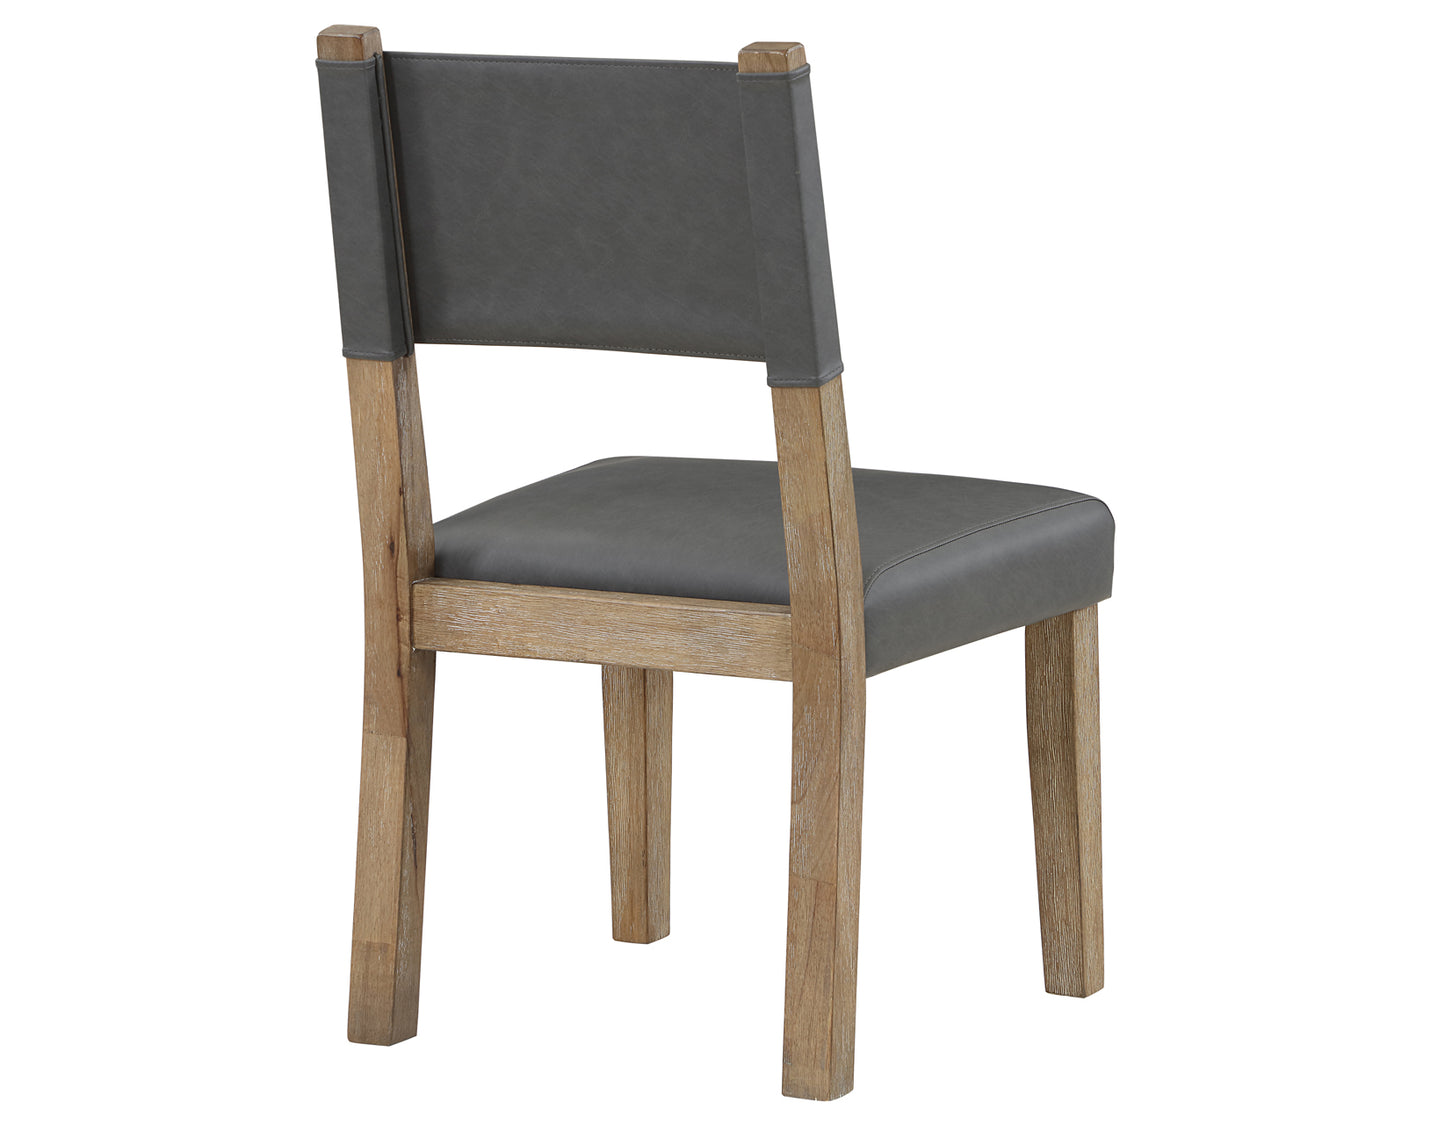 Aubrey Side Chair, Gray Vegan Leather with Driftwood wood finish